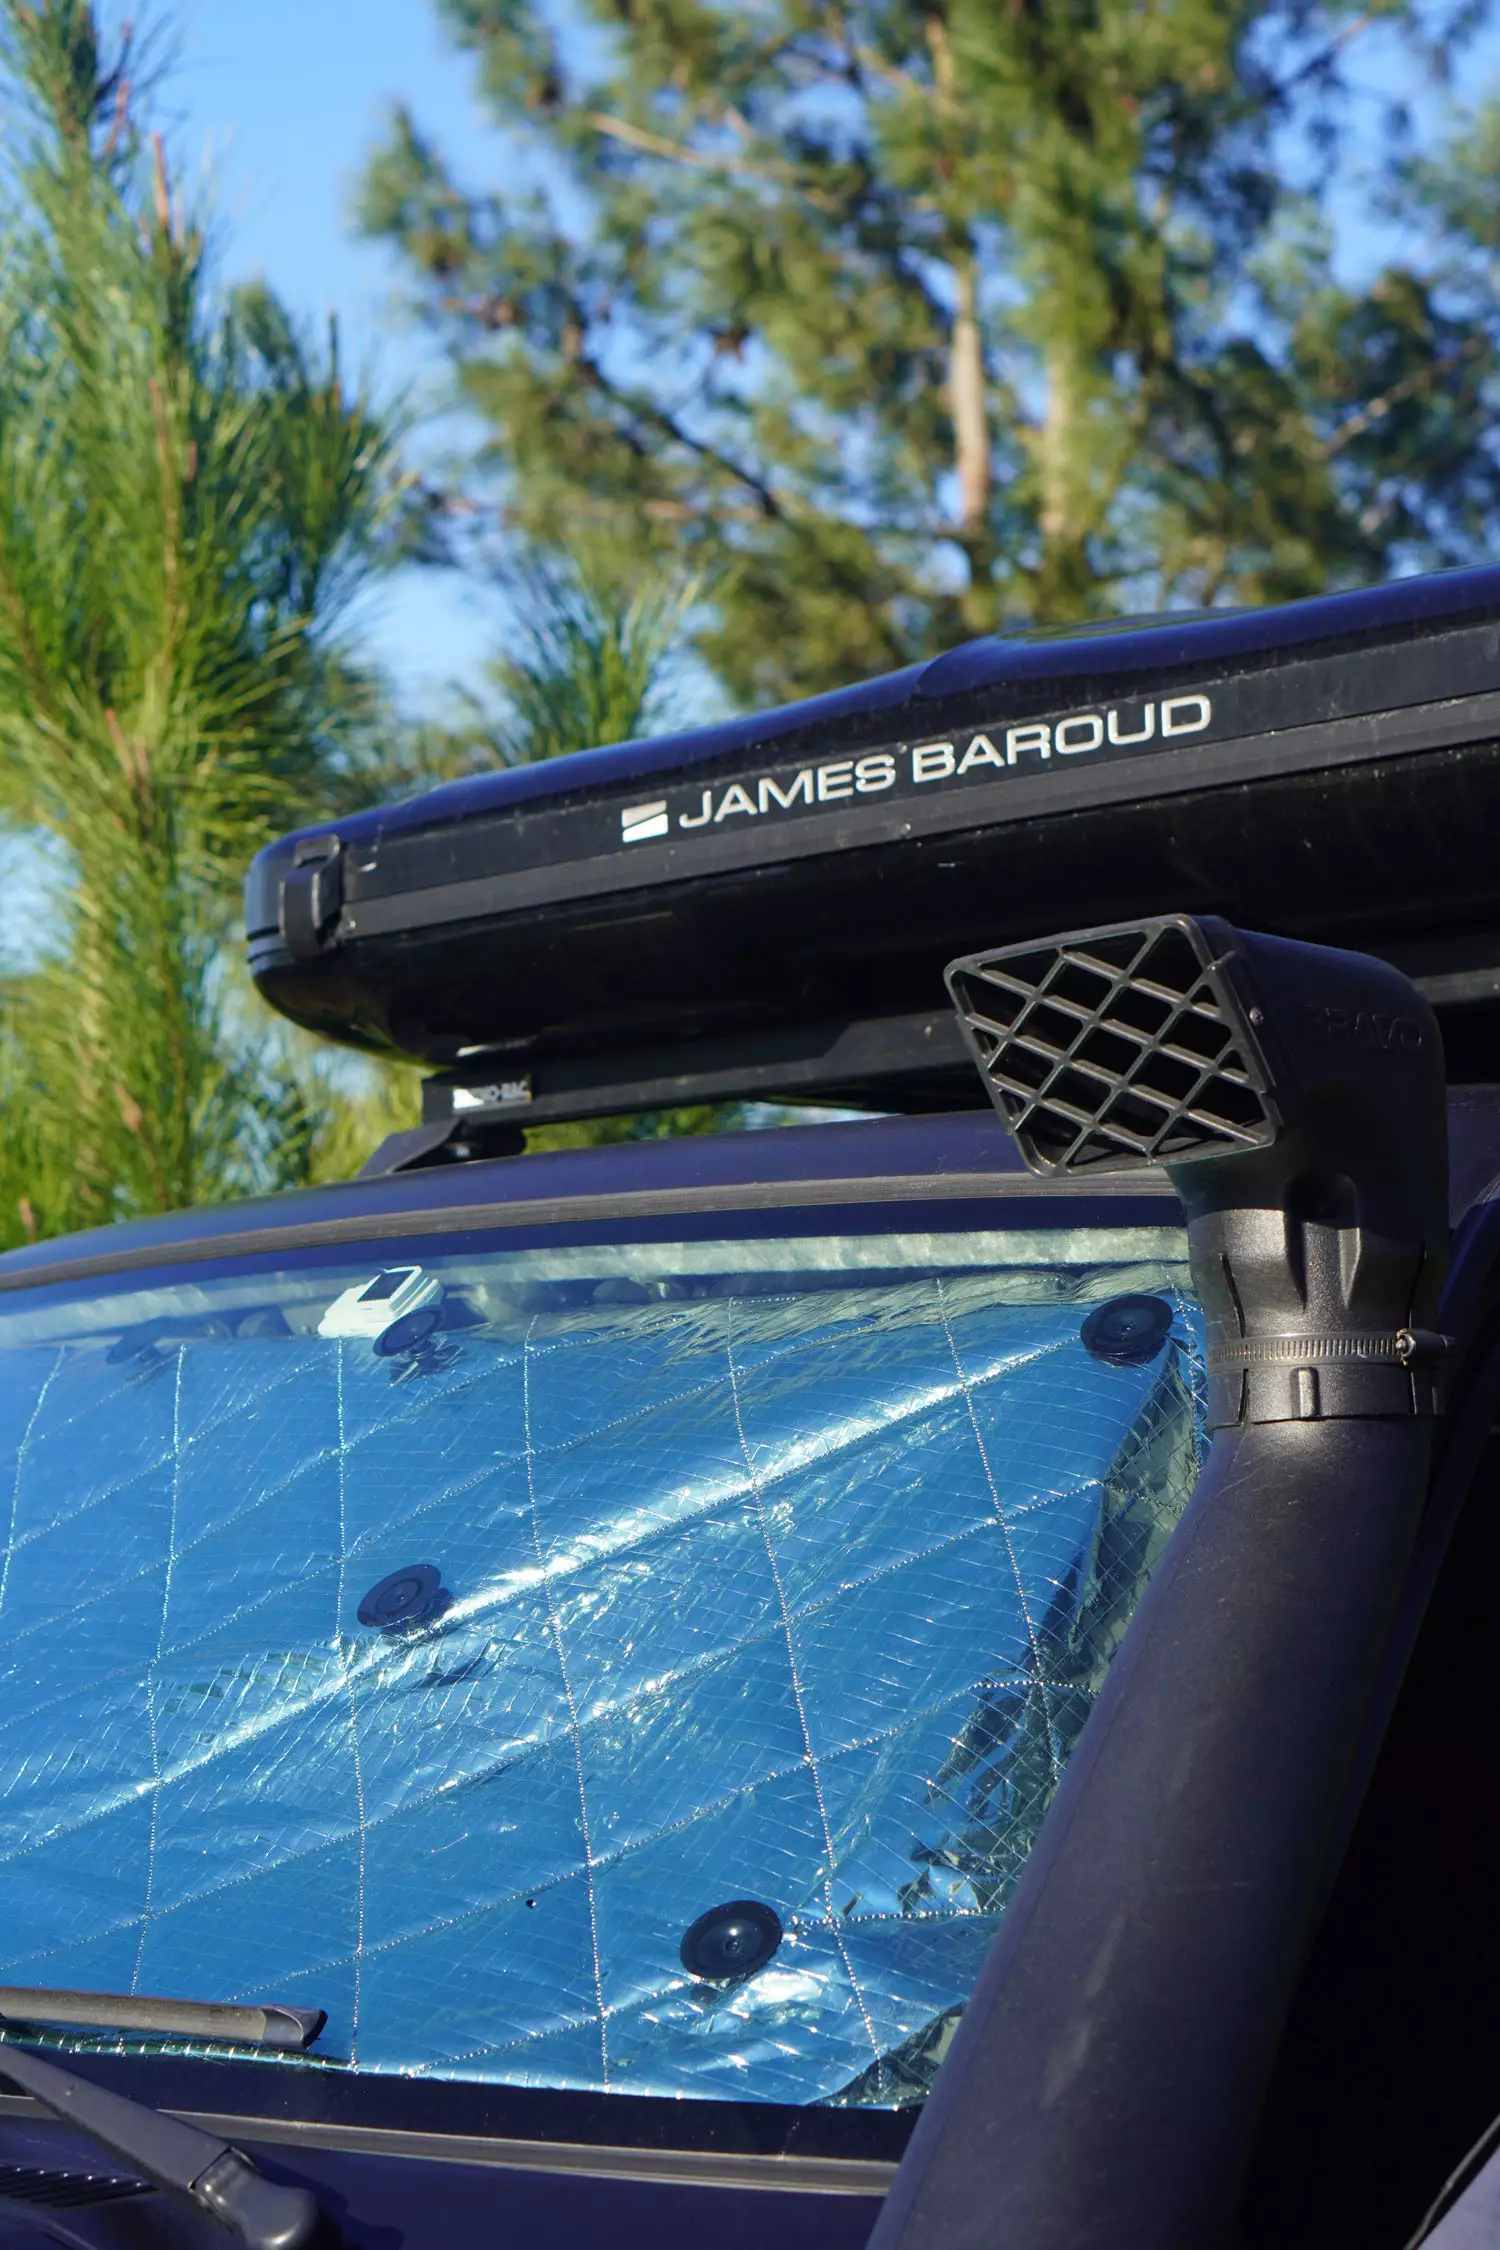 James Baroud Window Insulation Kit installed in a vehicle, optimizing temperature control